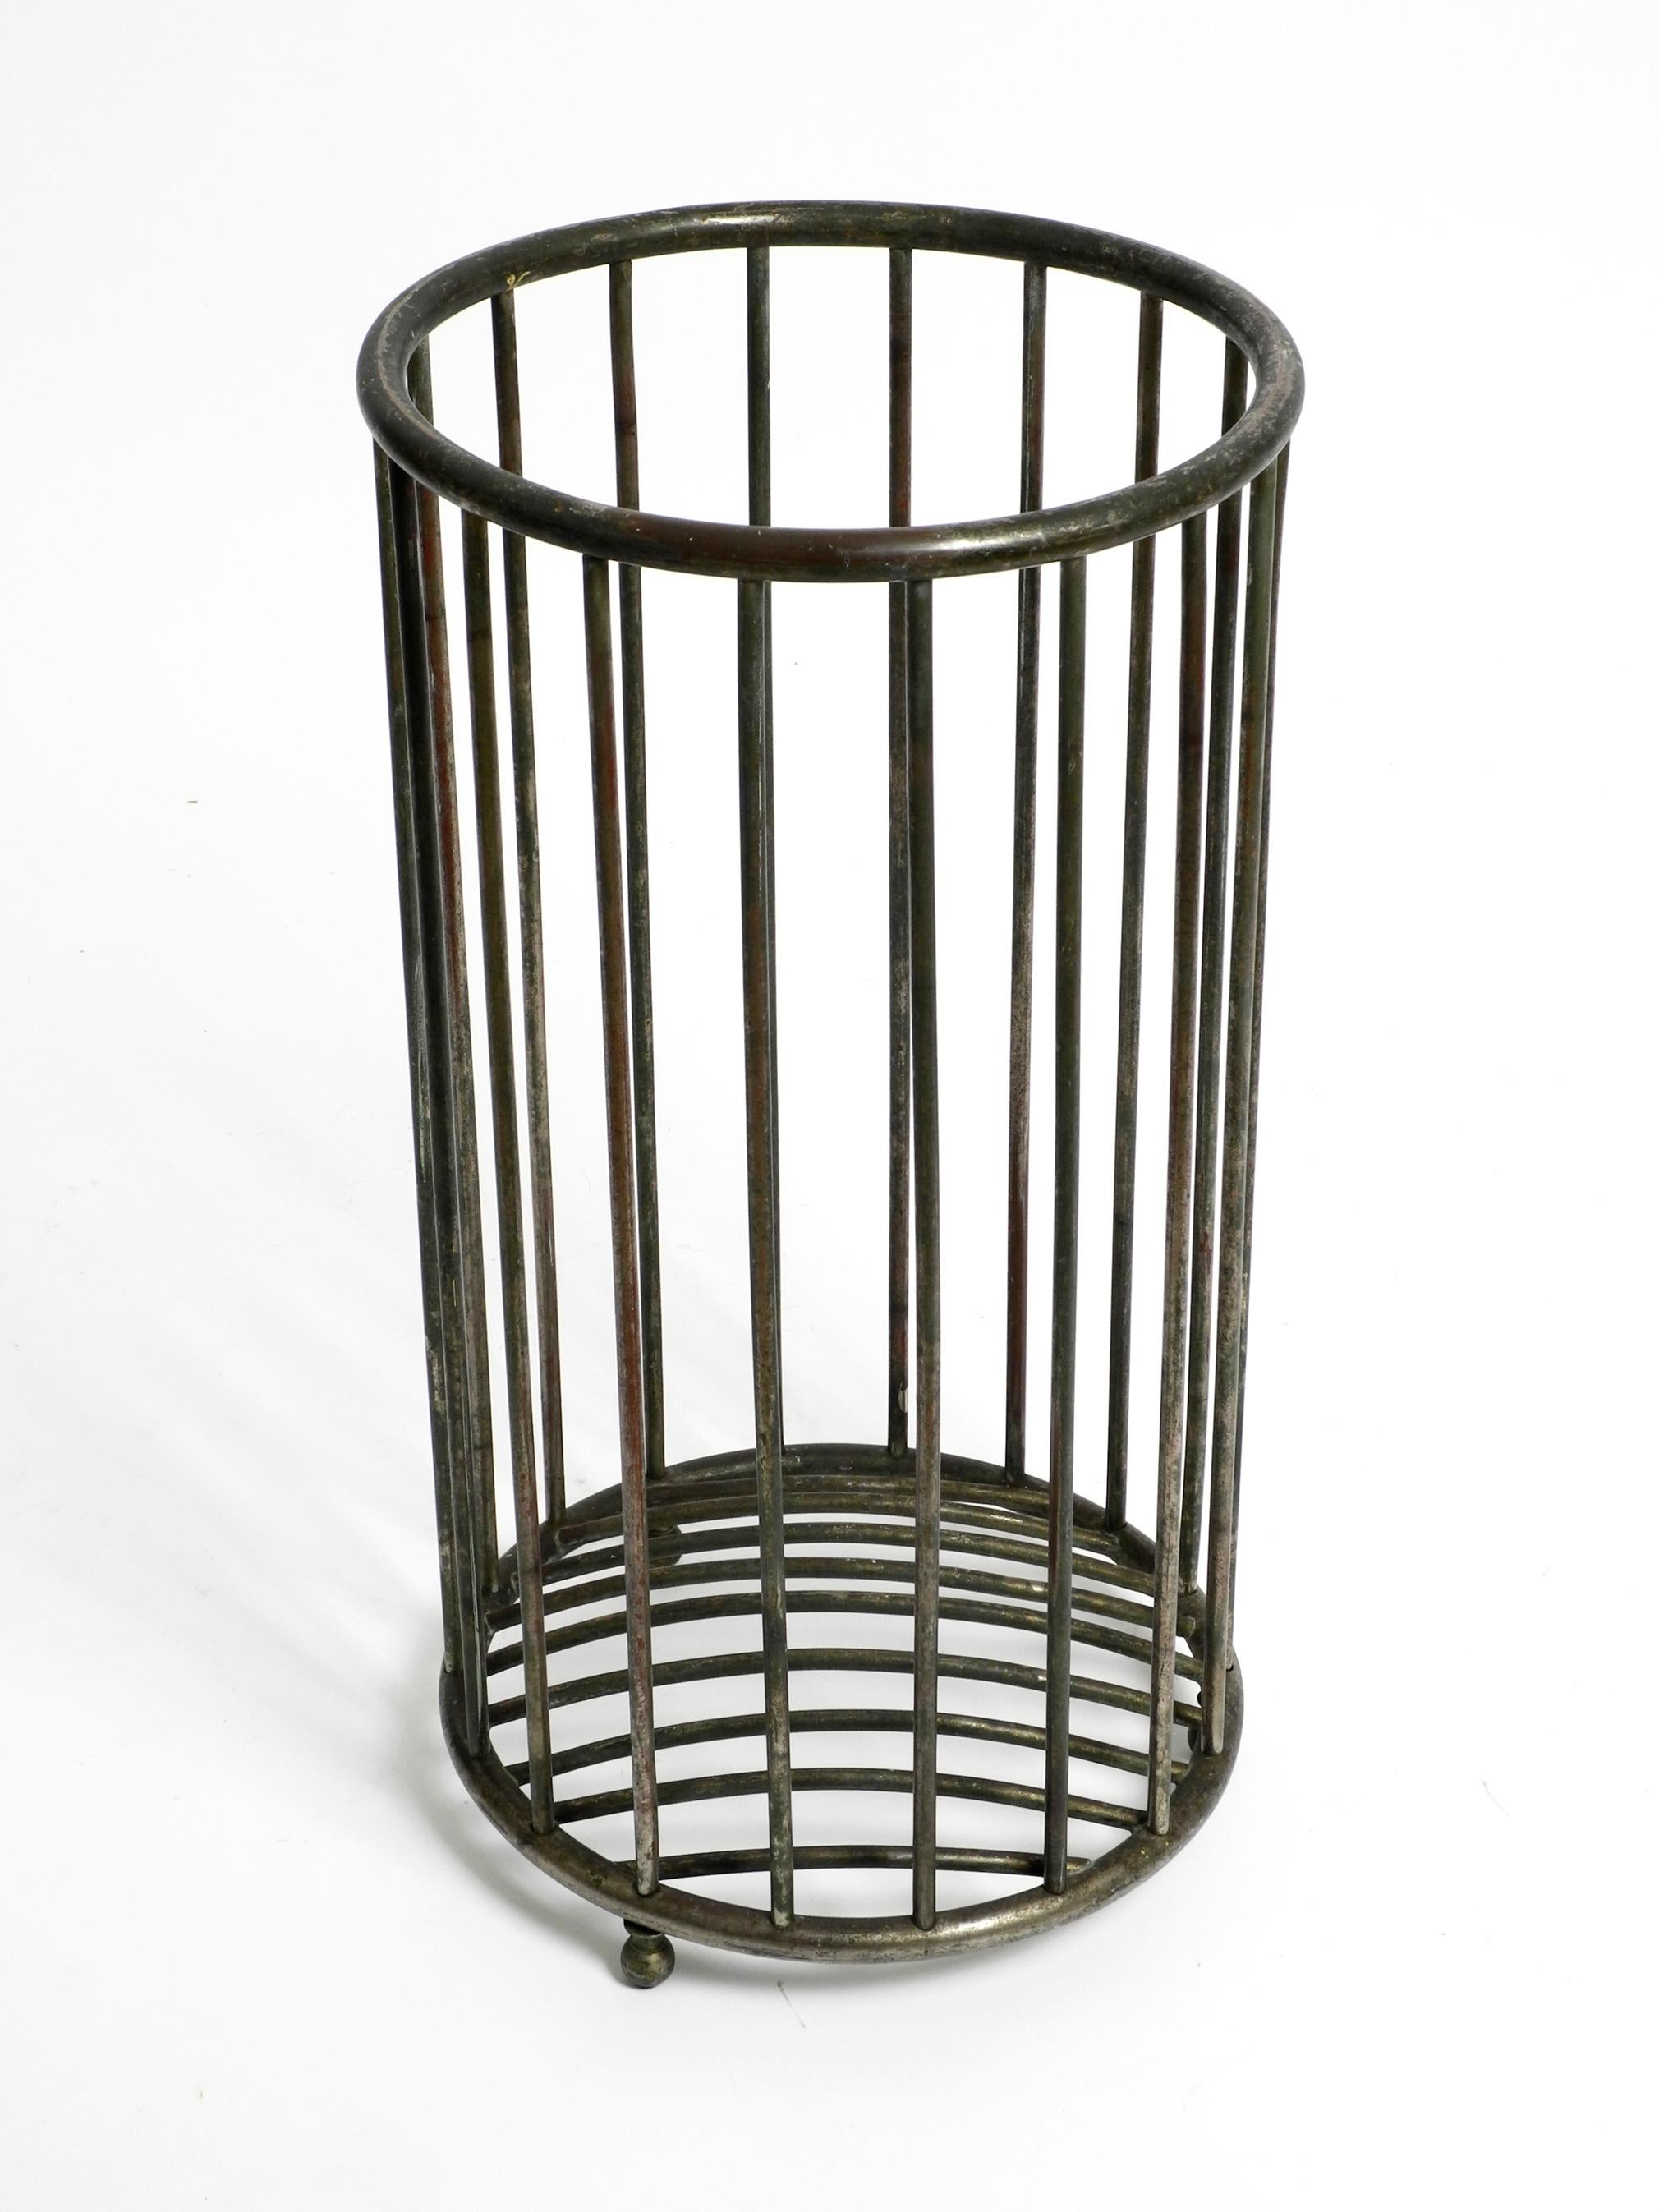 Original Mott's Plumbing towel basket, model Plate 3544 - A.
Manufactured from nickel plated brass in the 1910's. Made in USA.
Unrestored original condition. Beautiful minimalistic design
This freestanding towel basket was designed to store used